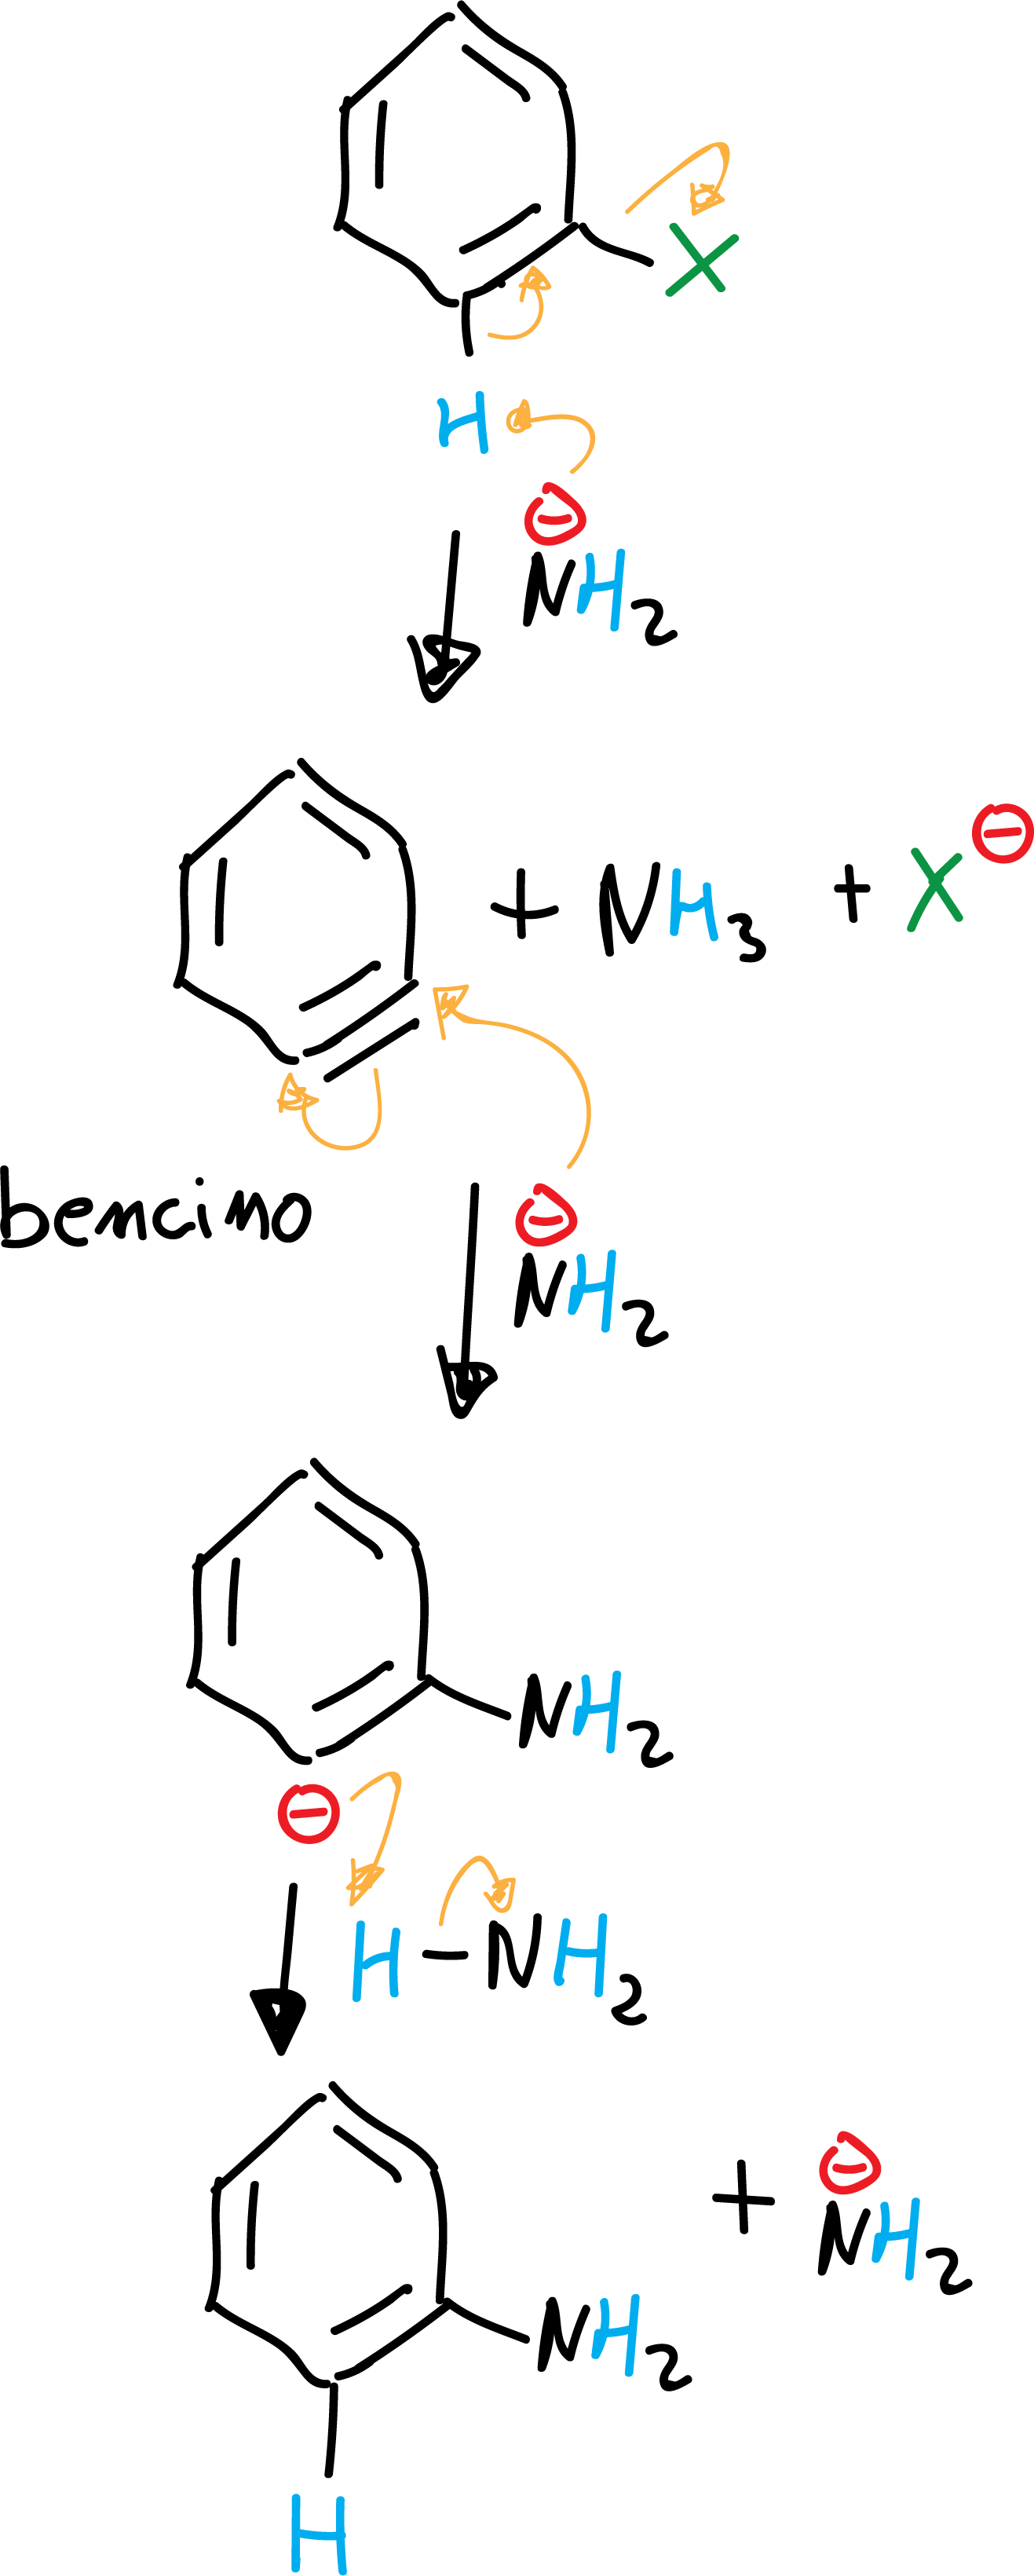 Aromatic Substitution Reactions in Benzene and Derivatives: Polycyclic aromatic hydrocarbons; mechanism addition-elimination mechanism via benzyne